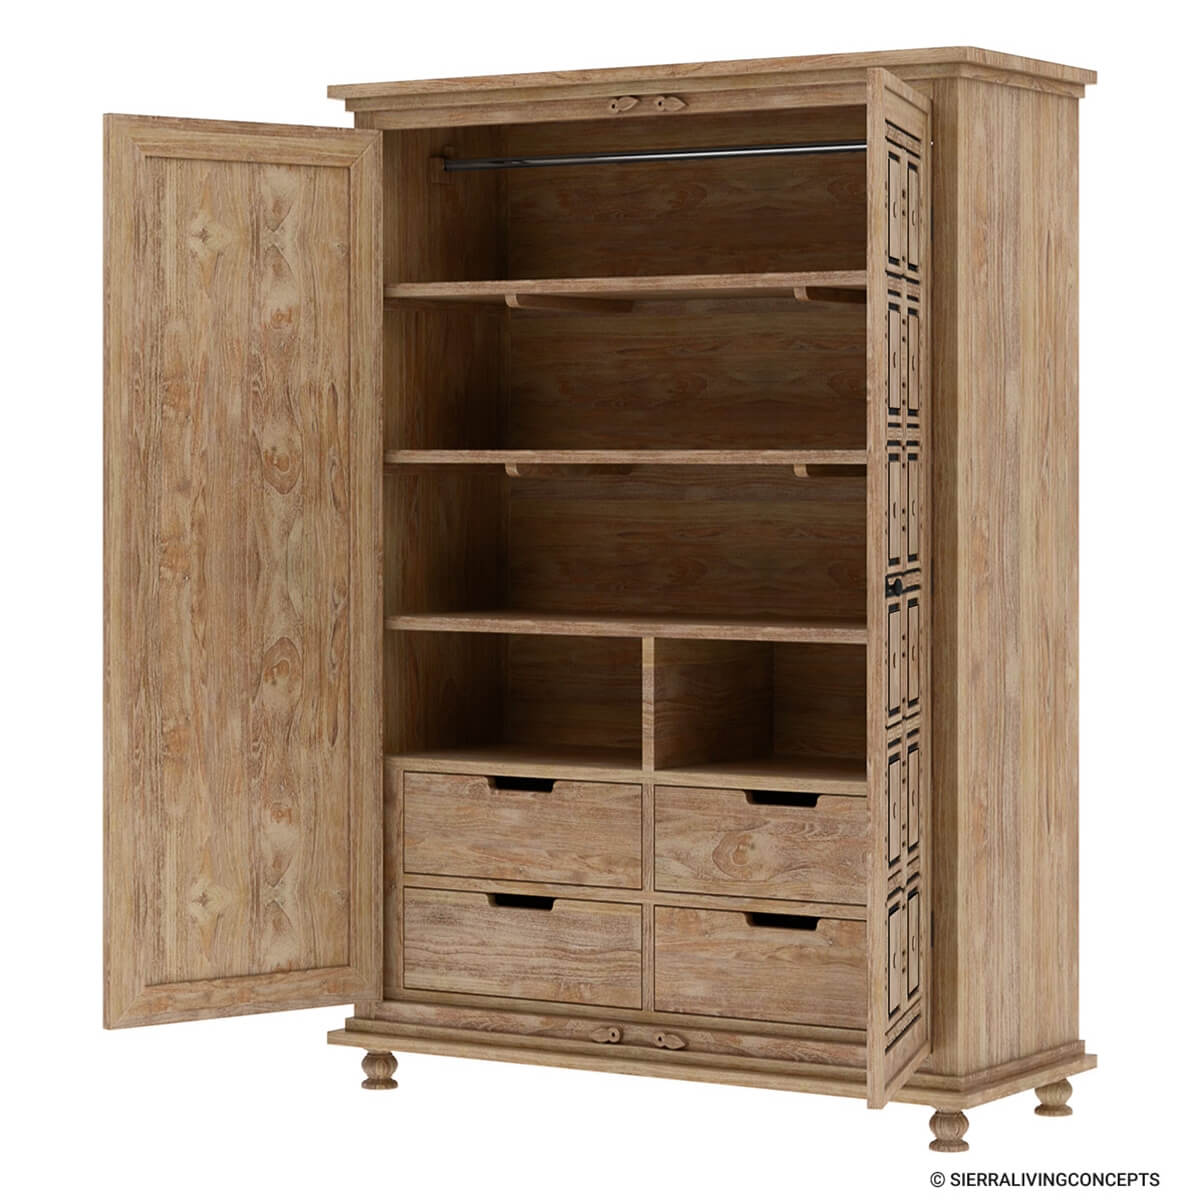 https://www.sierralivingconcepts.com/images/thumbs/0404597_morna-solid-teak-wood-clothing-armoire-wardrobe-with-removable-shelves.jpeg